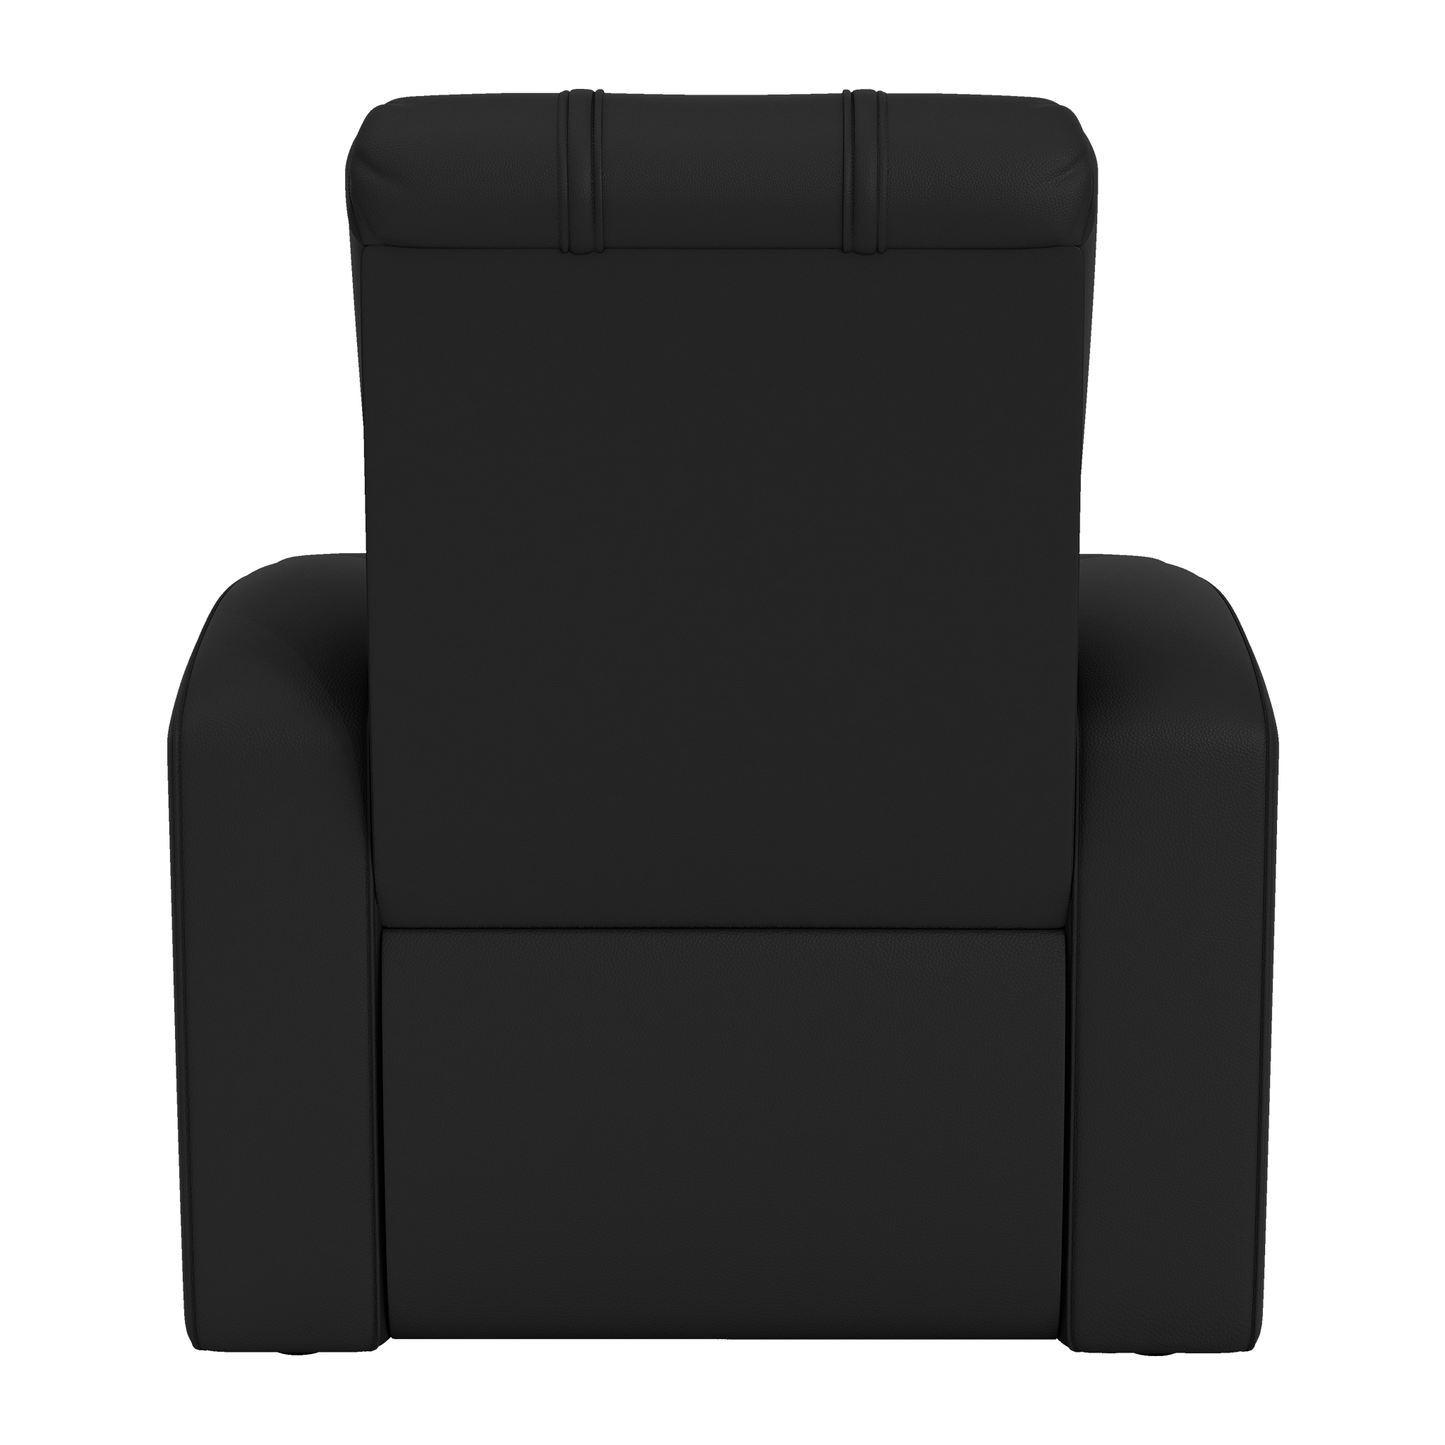 Relax Home Theater Recliner with San Antonio Spurs Logo